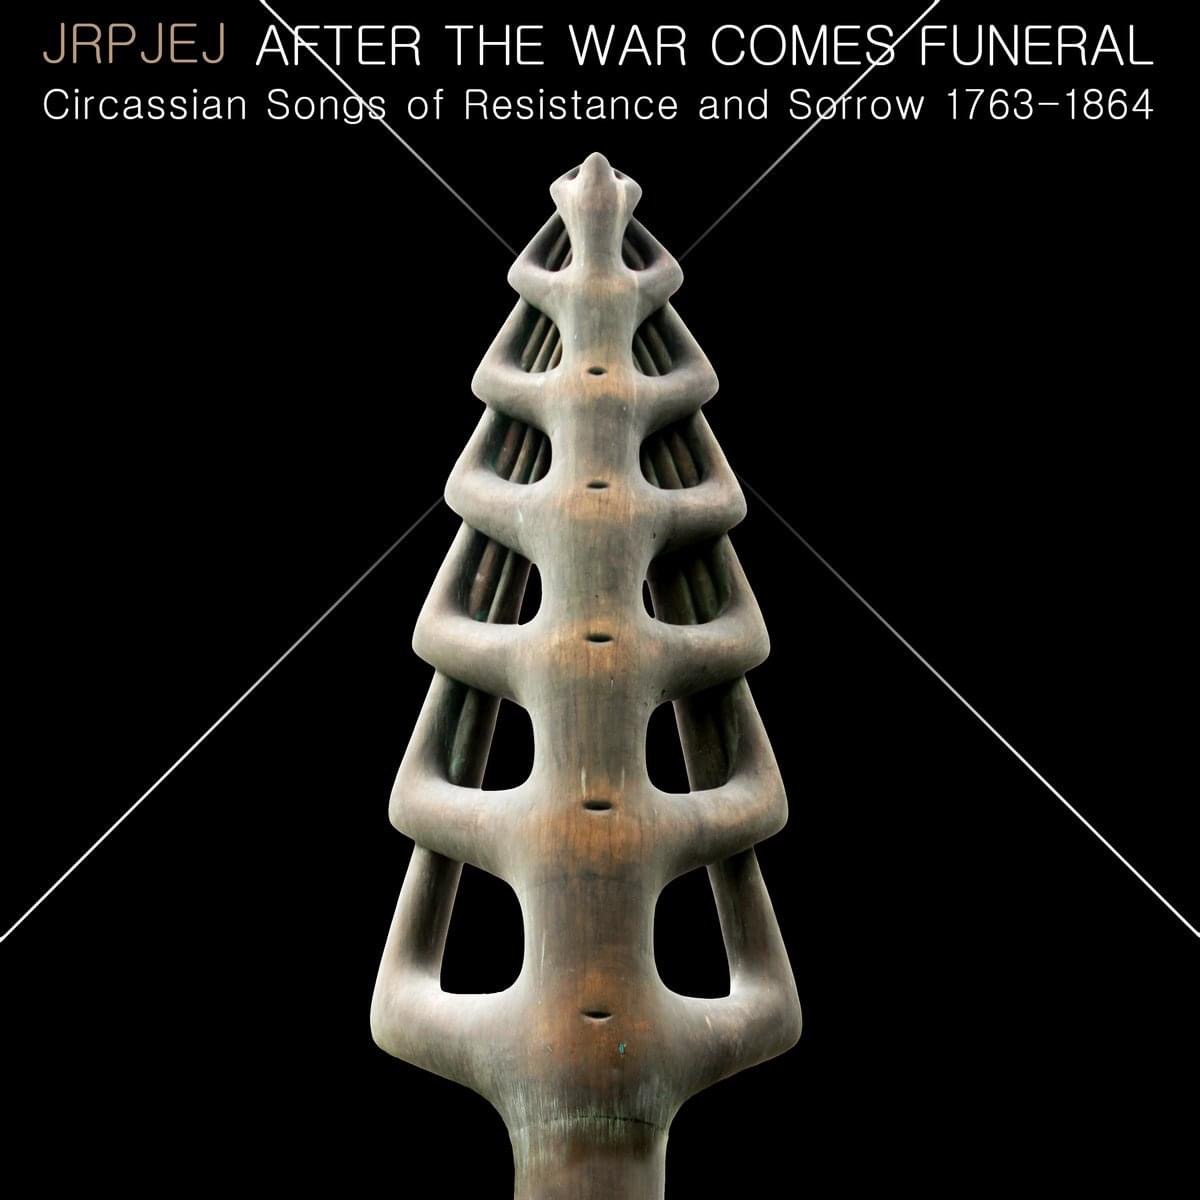 JRPJEJ-After The War Comes Funeral: Circassian Songs of Resistance and Sorrow 1763-1864